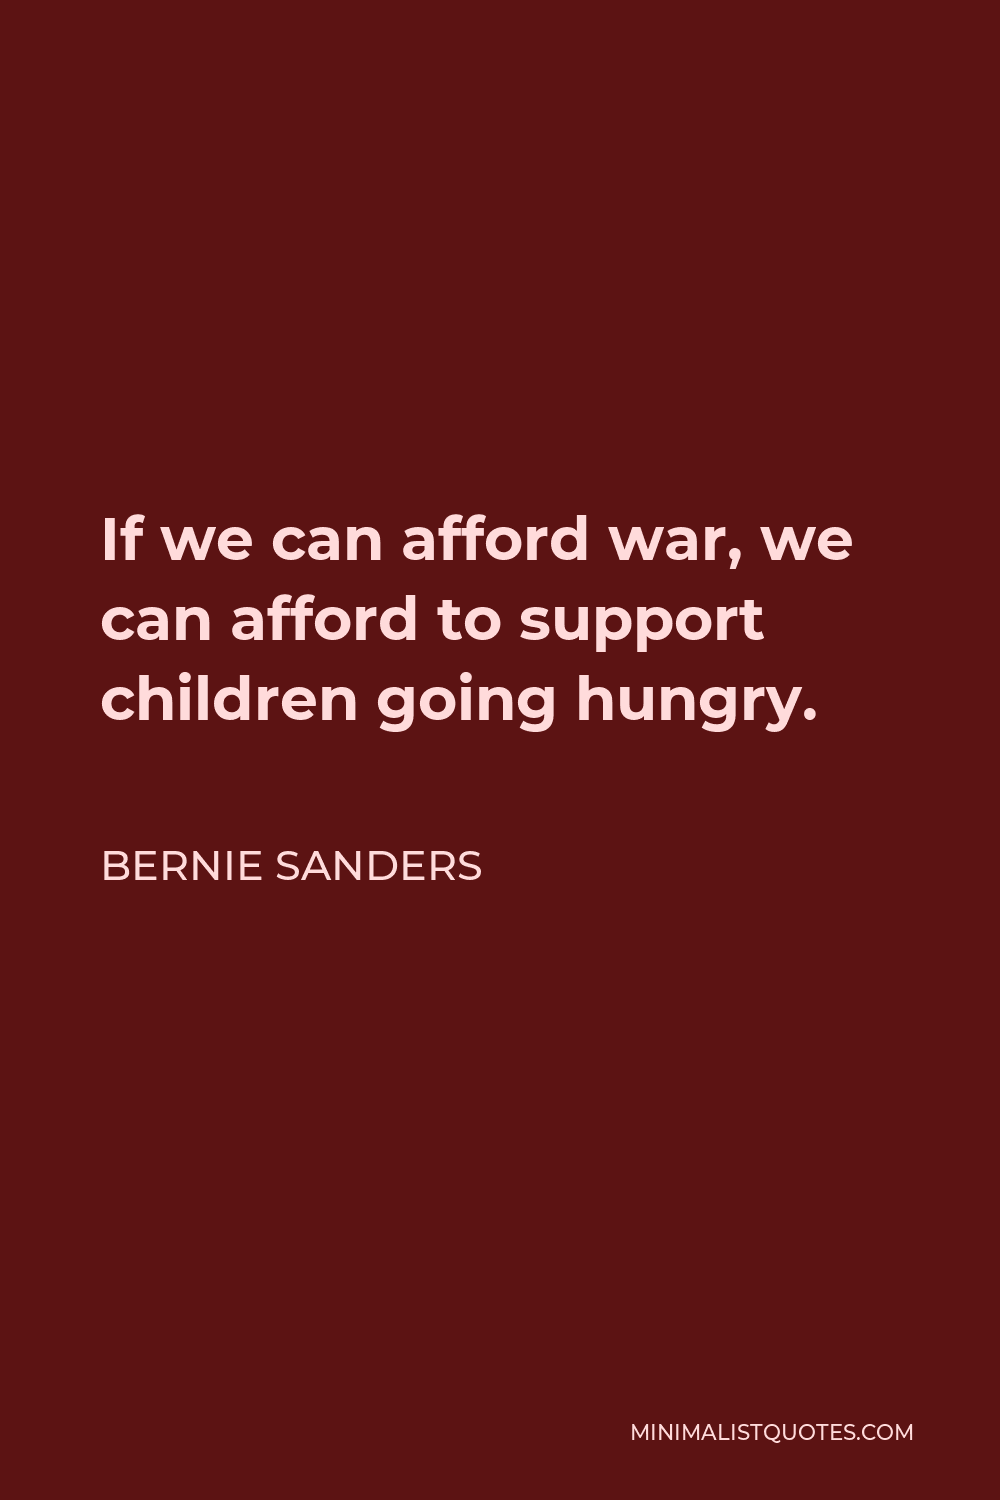 Bernie Sanders Quote - If we can afford war, we can afford to support children going hungry.